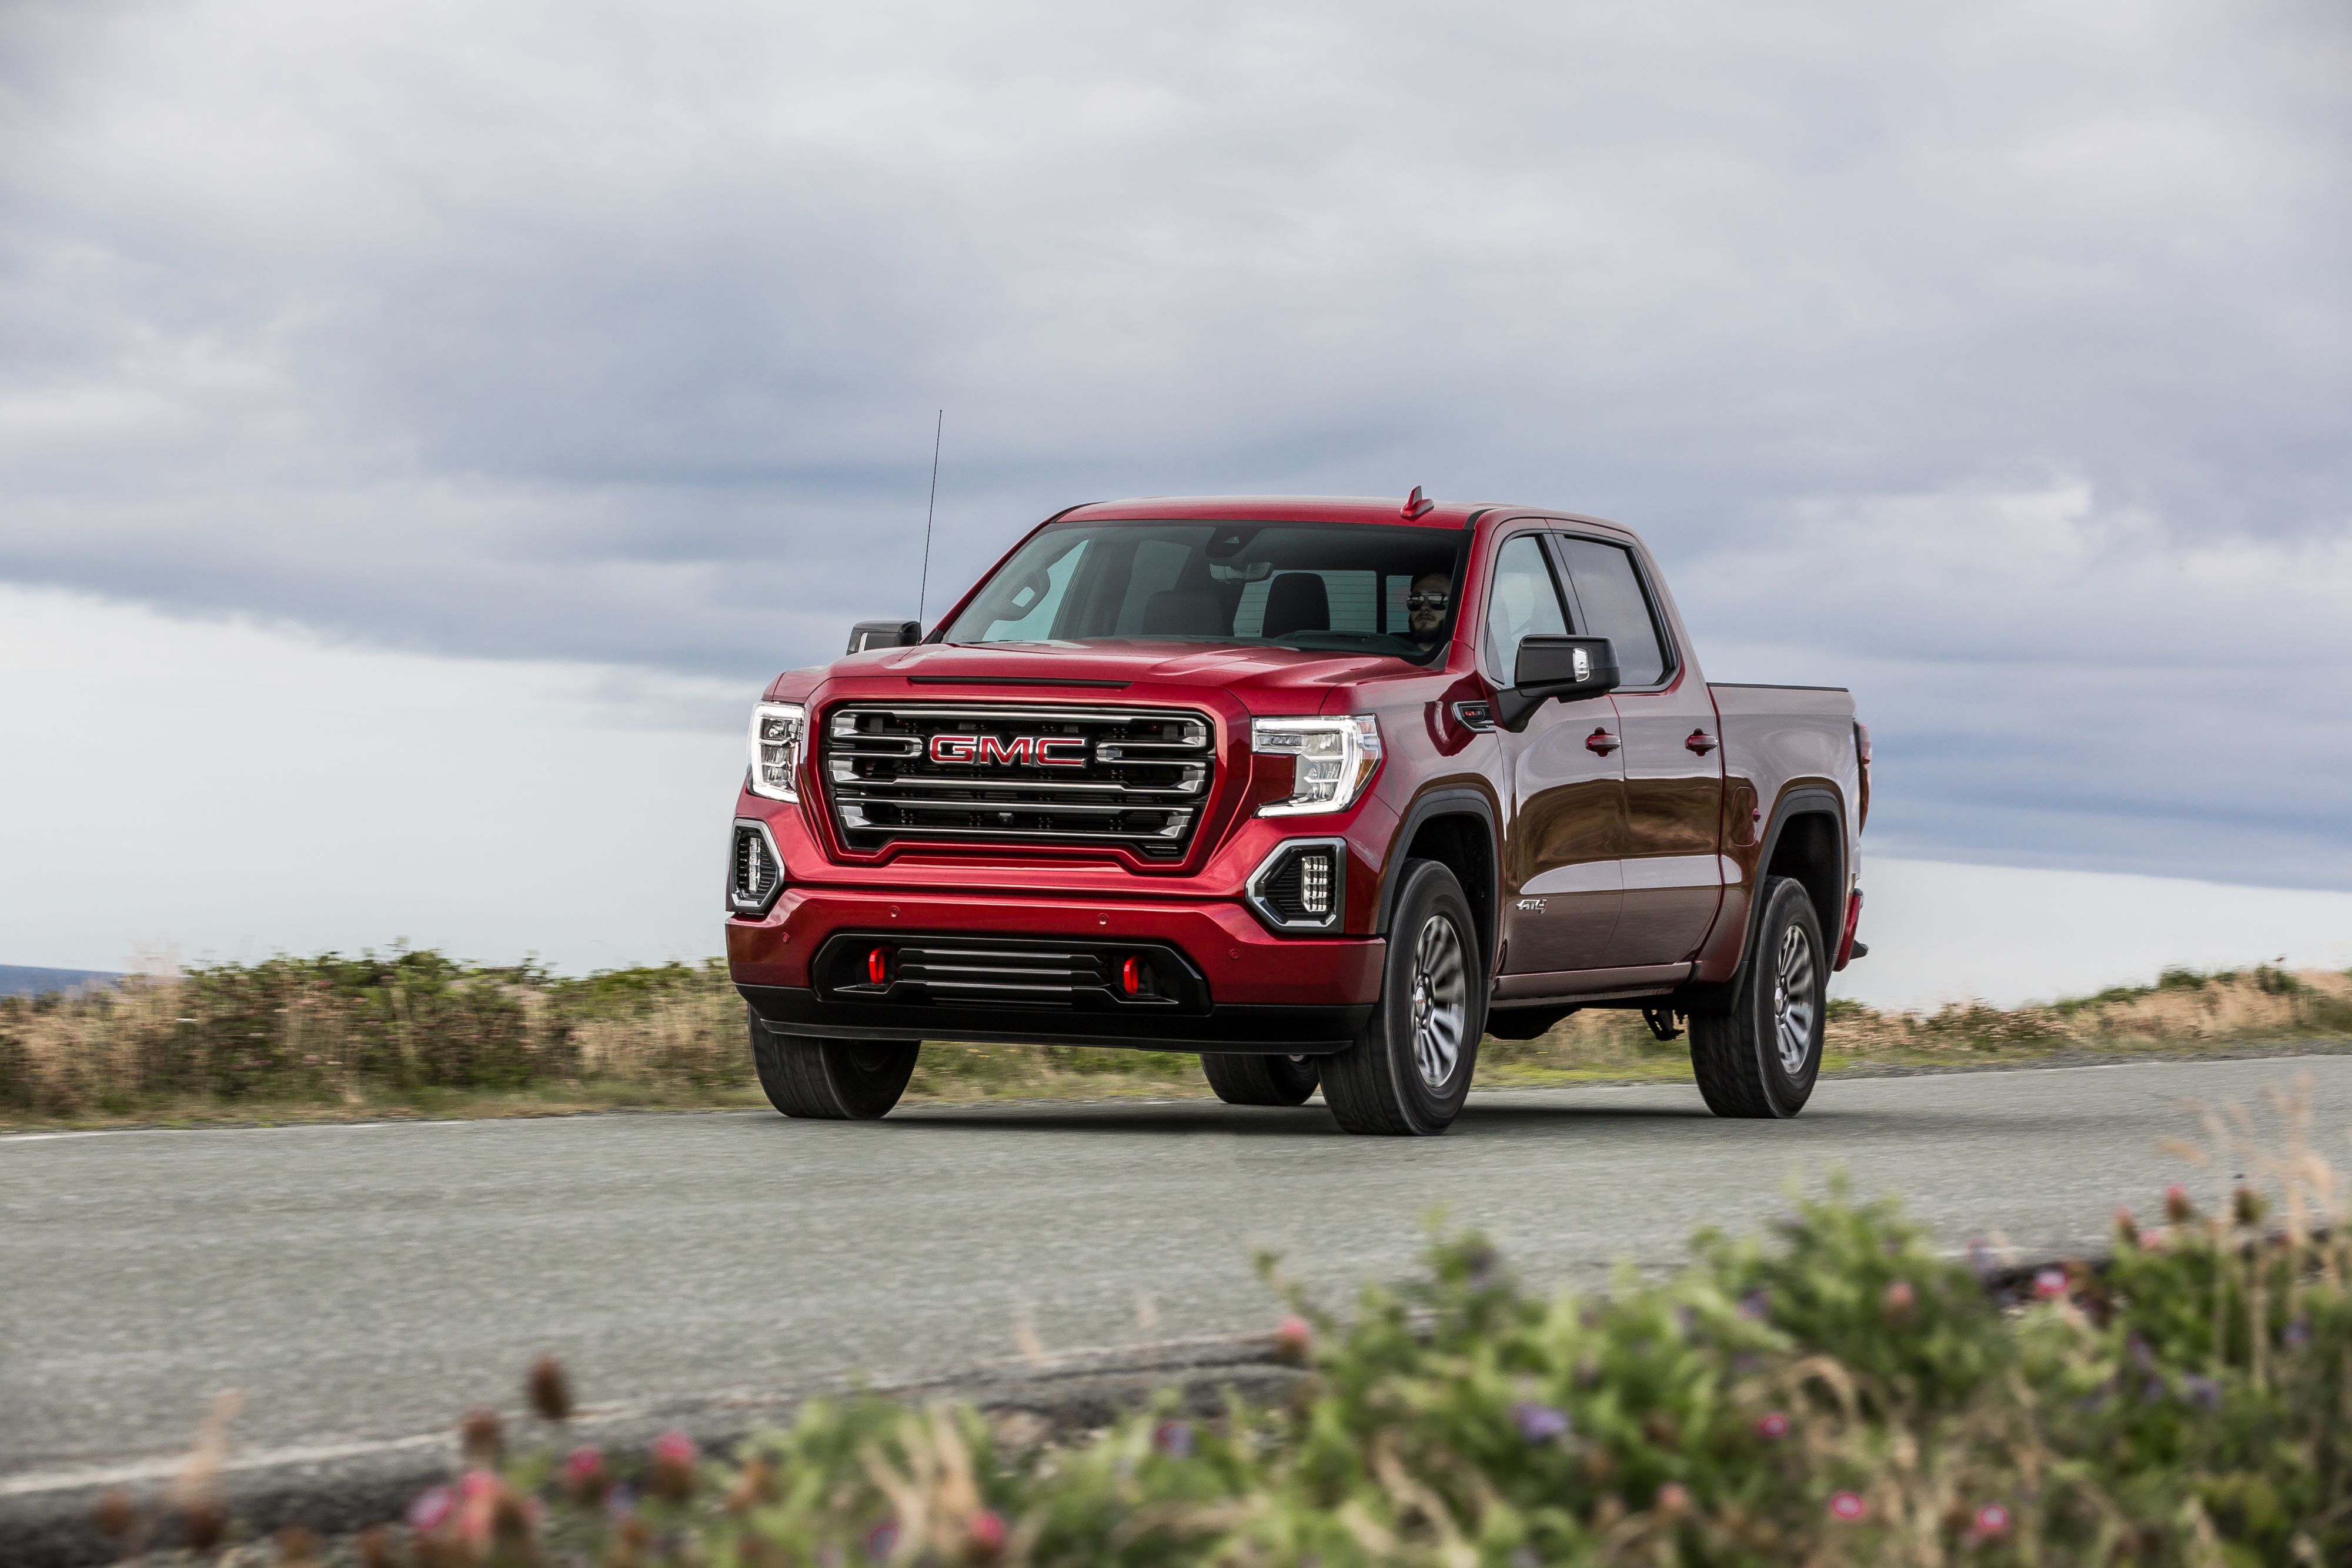 GM Ranks as Top Automotive Corporation in J.D. Power’s 2020 Initial Quality Study